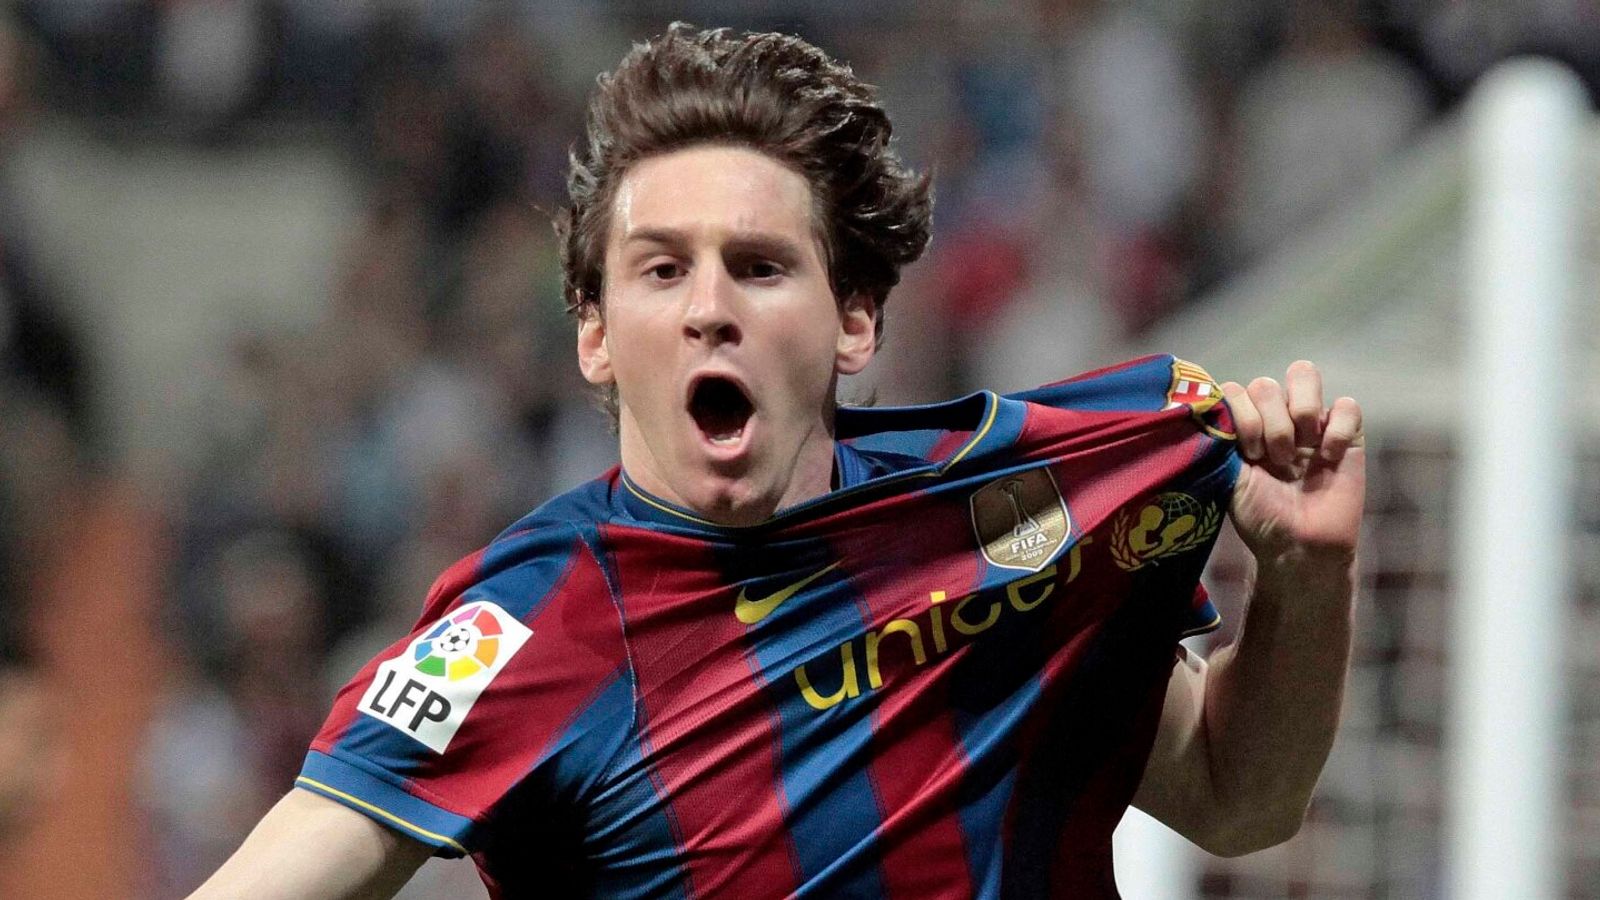 Lionel Messi: Napkin that sealed football legend's move to Barcelona sells for £762,000